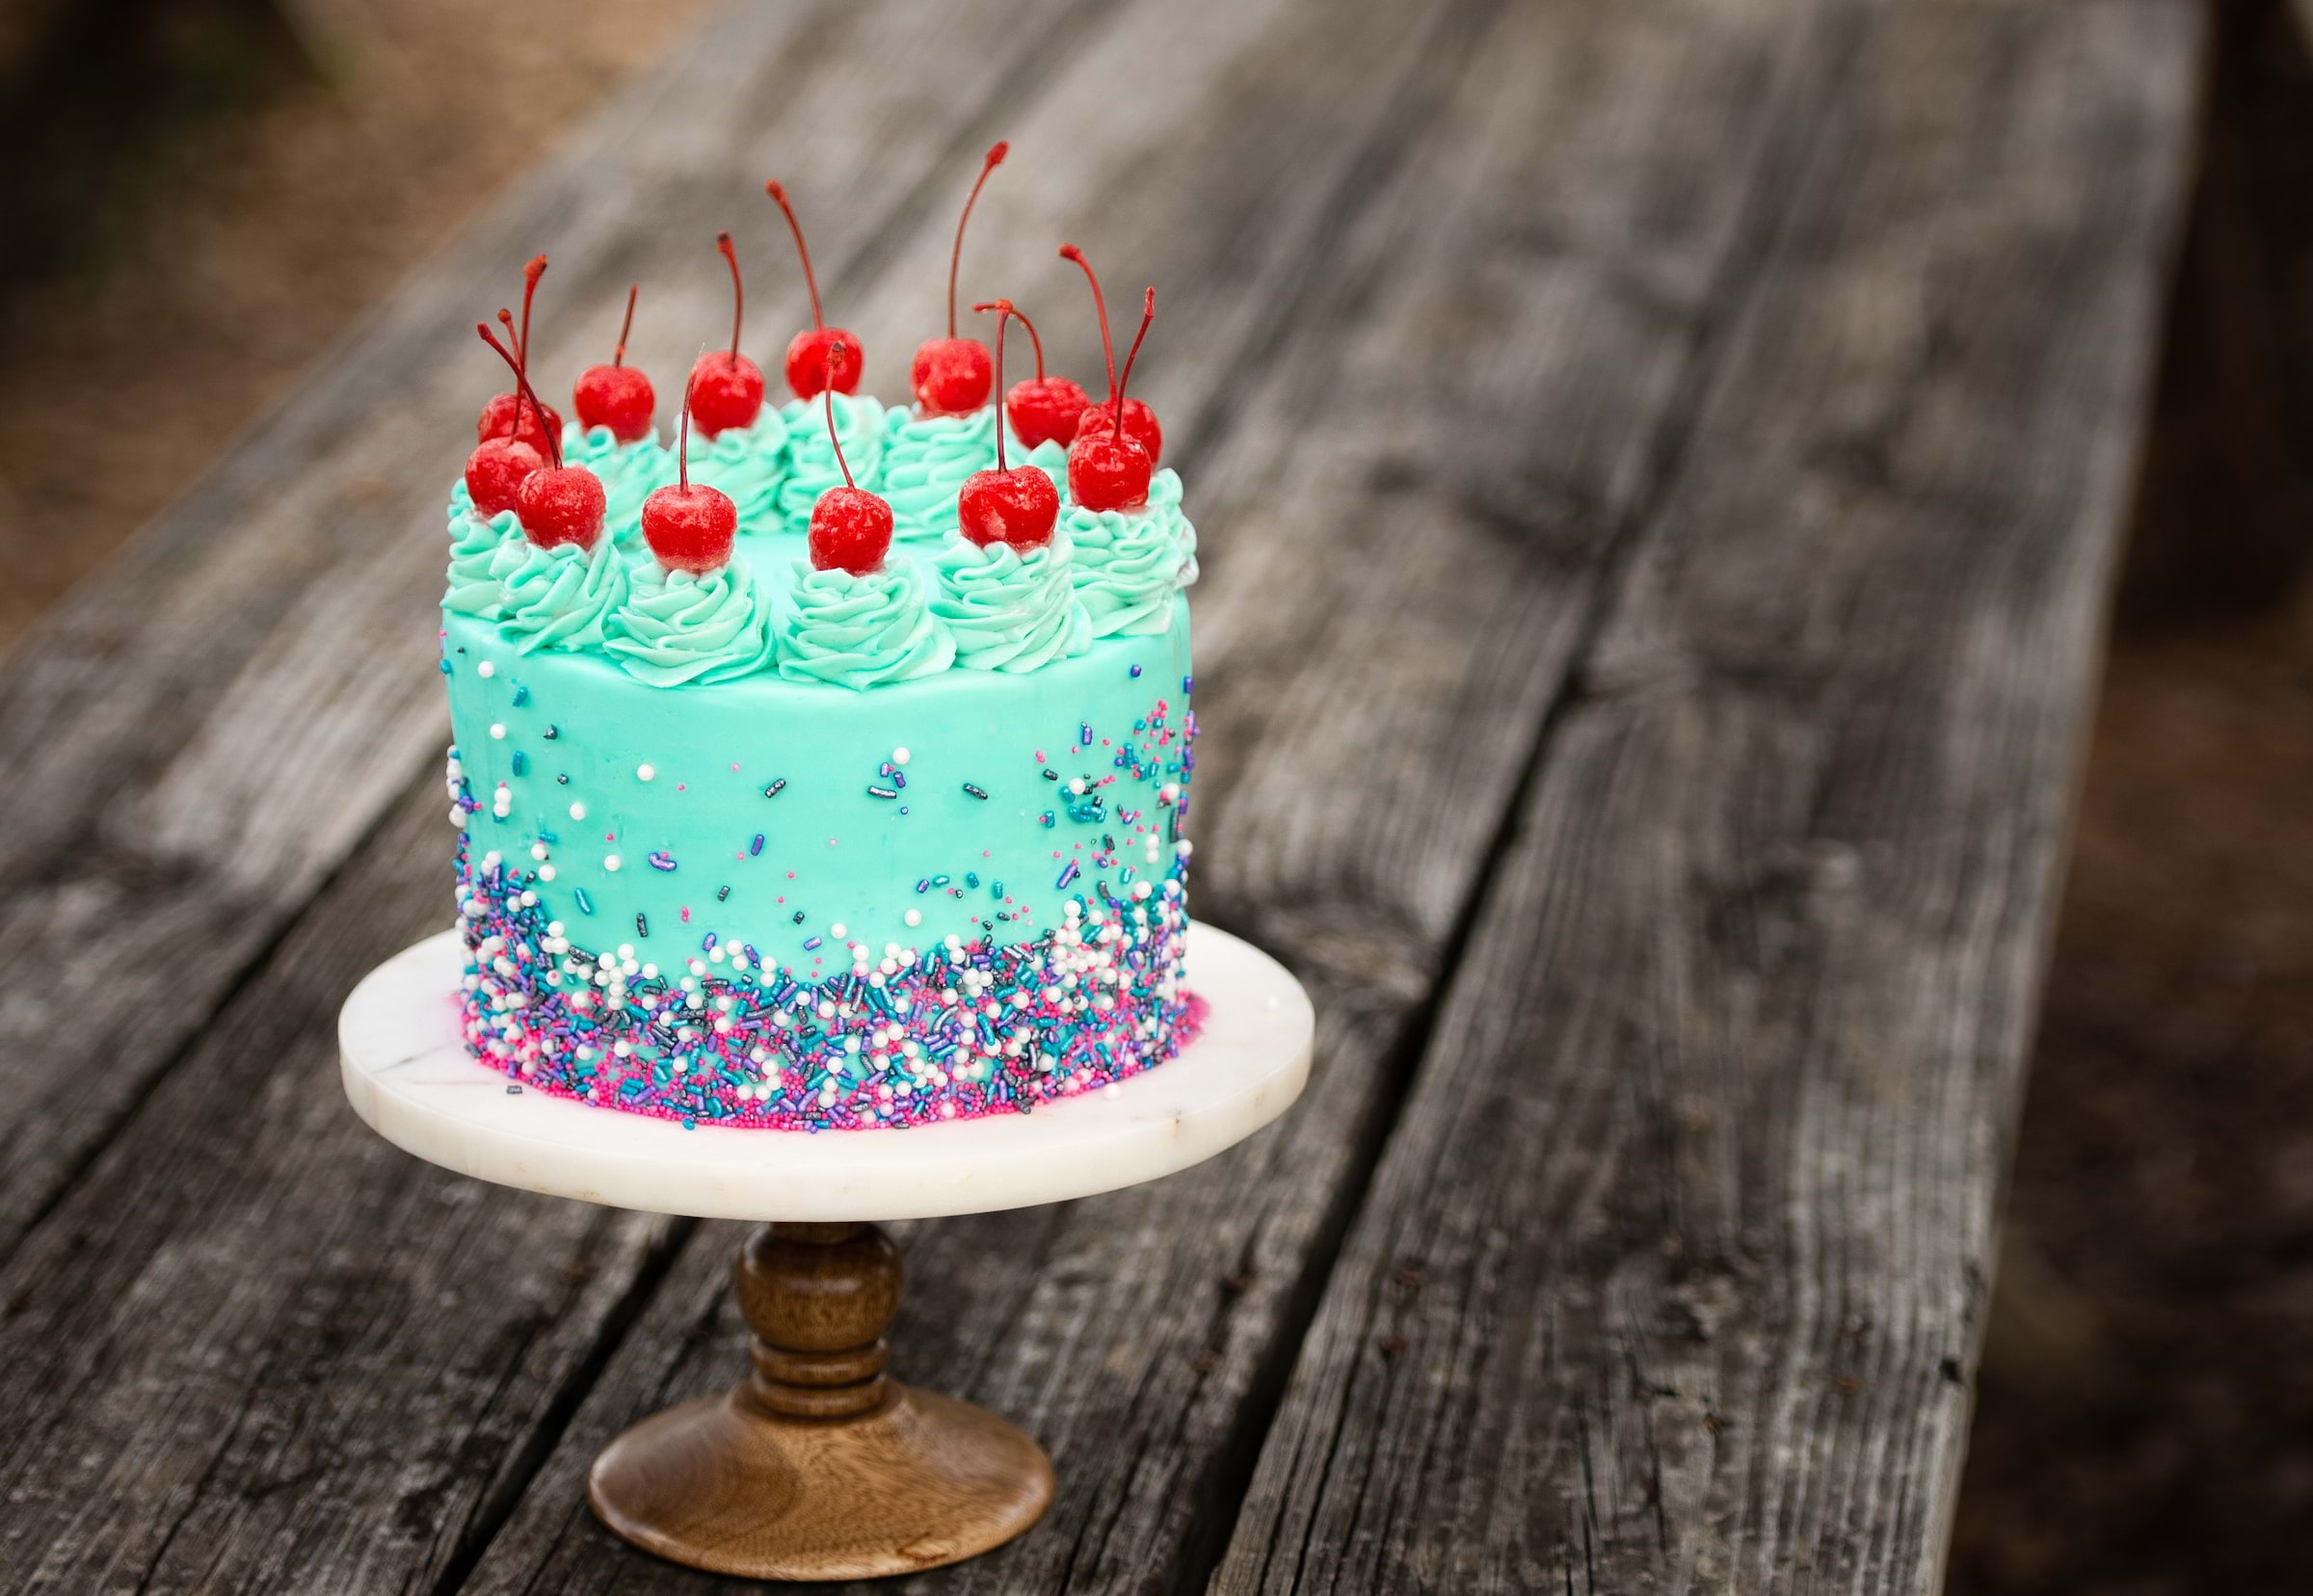 6 places to order special birthday cakes in and around Vancouver  Dished